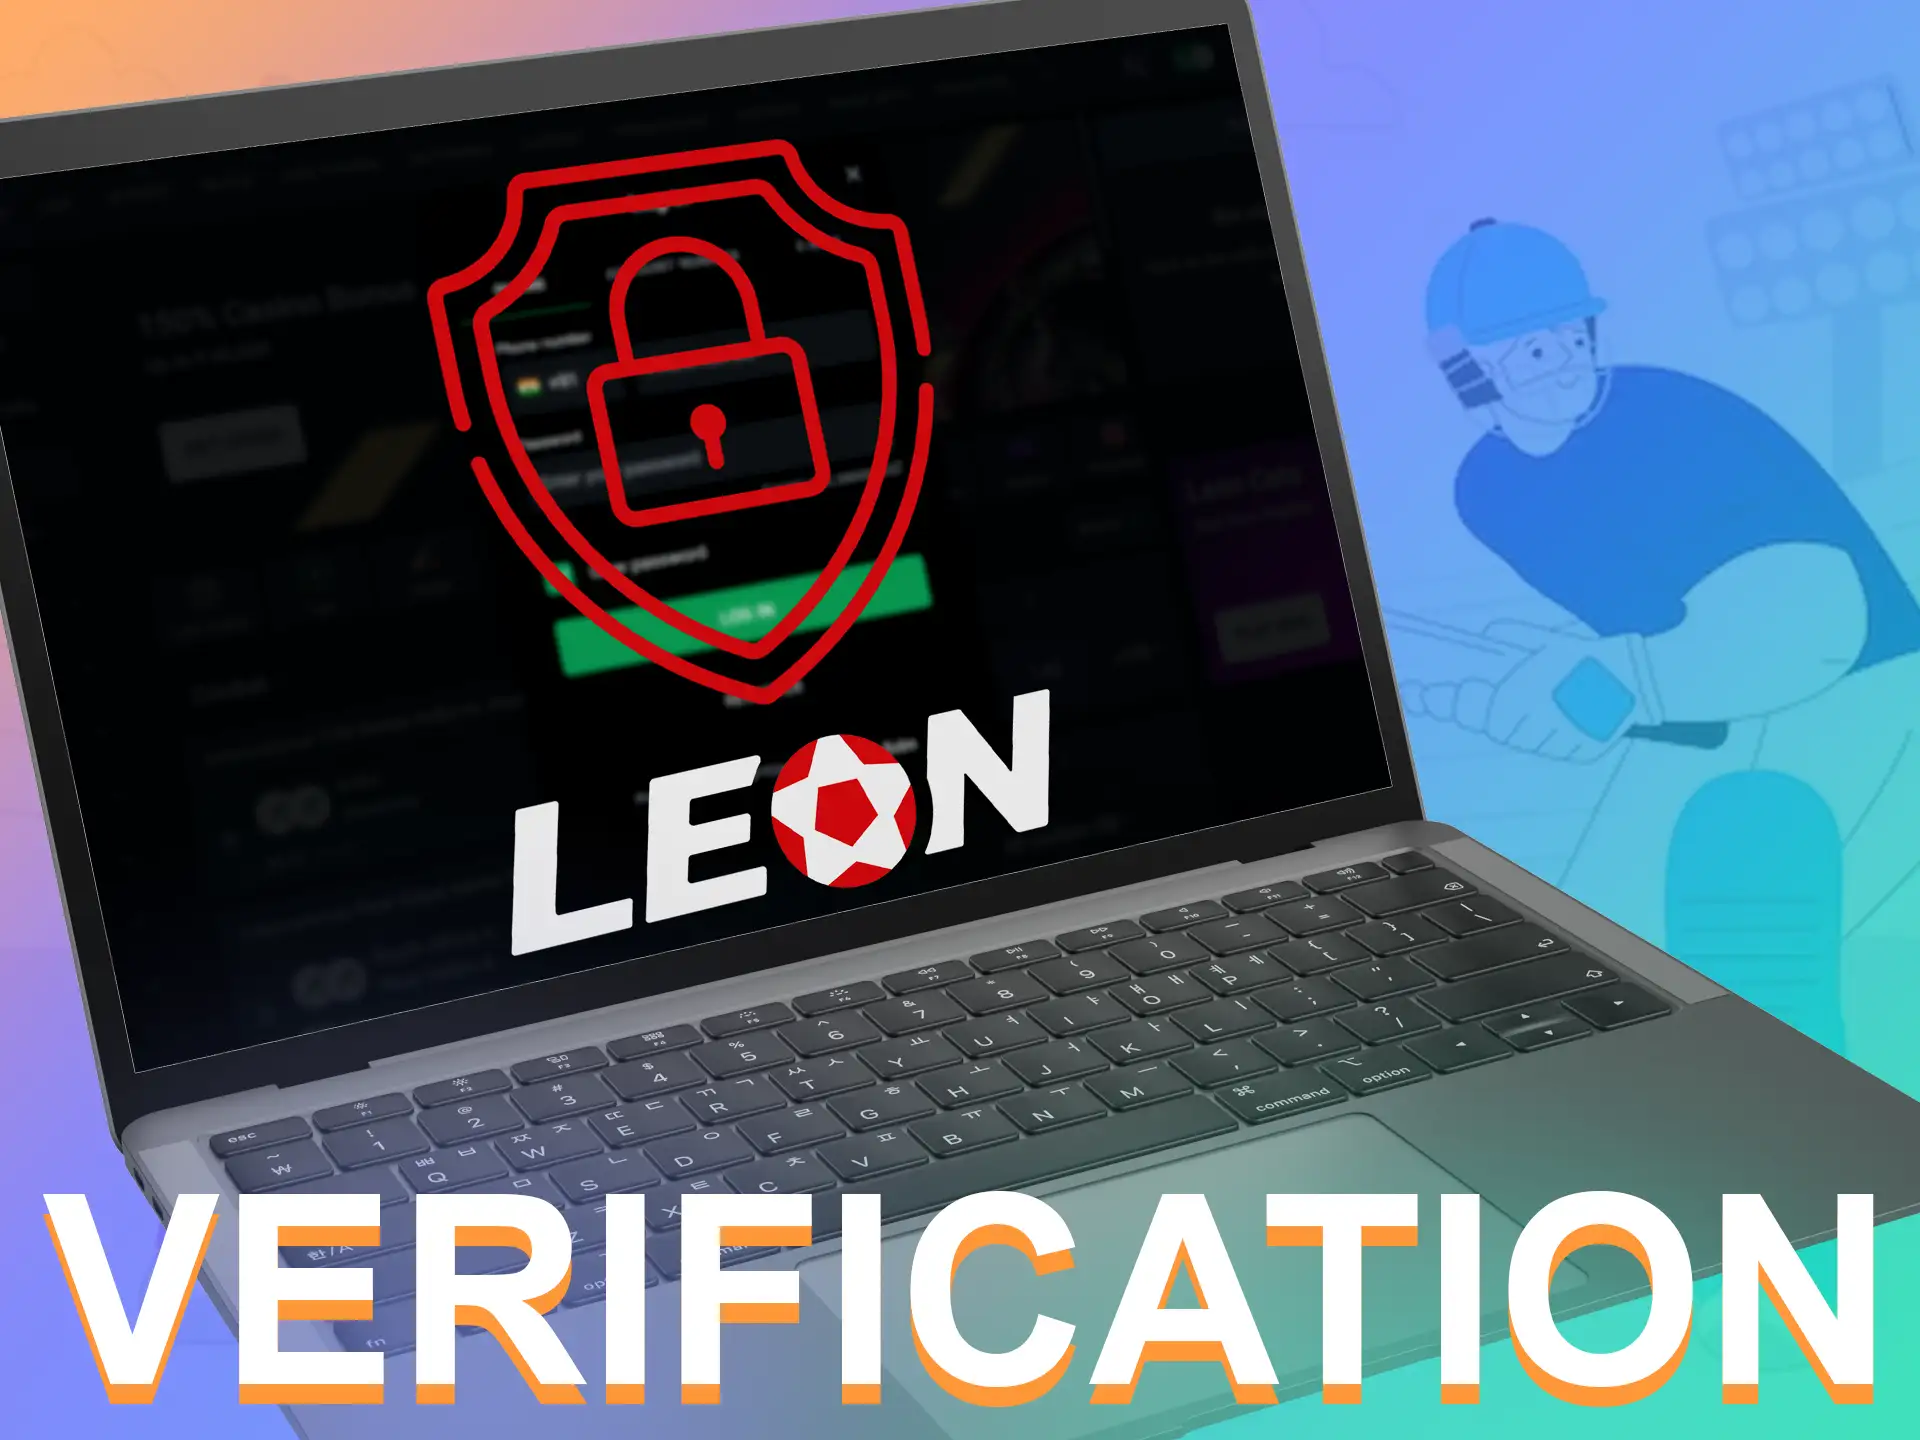 Verification of the LeonBet account is mandatory for players to deposit and withdraw funds.